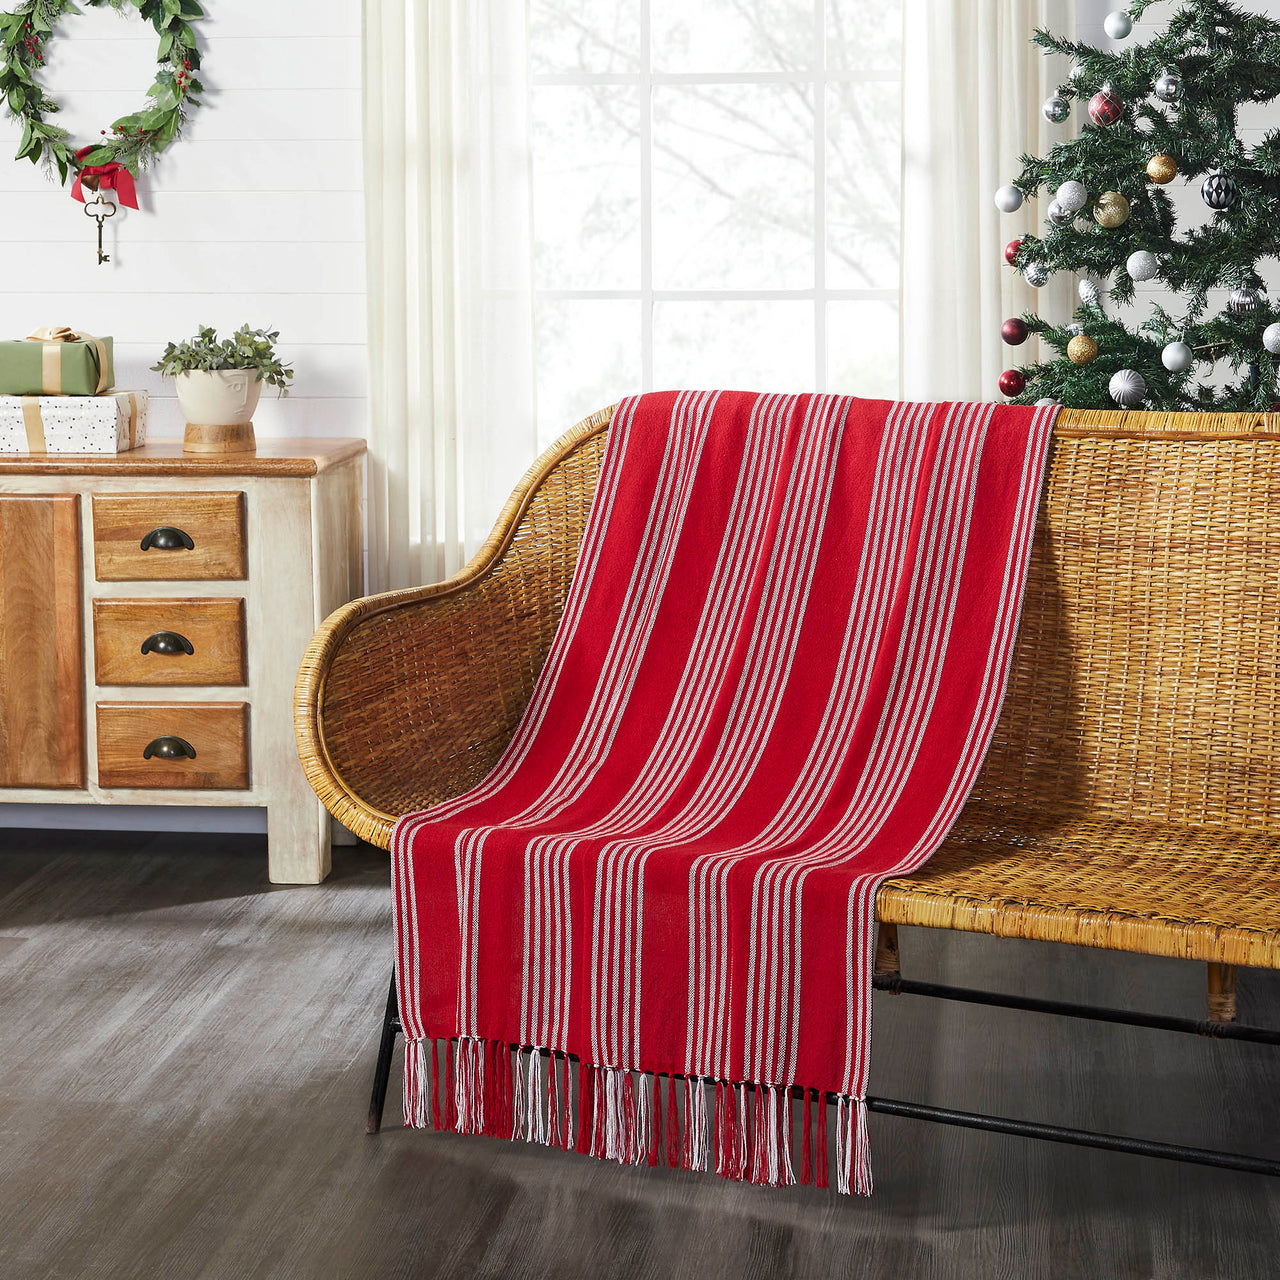 Arendal Red Stripe Woven Throw 50"x60" VHC Brands